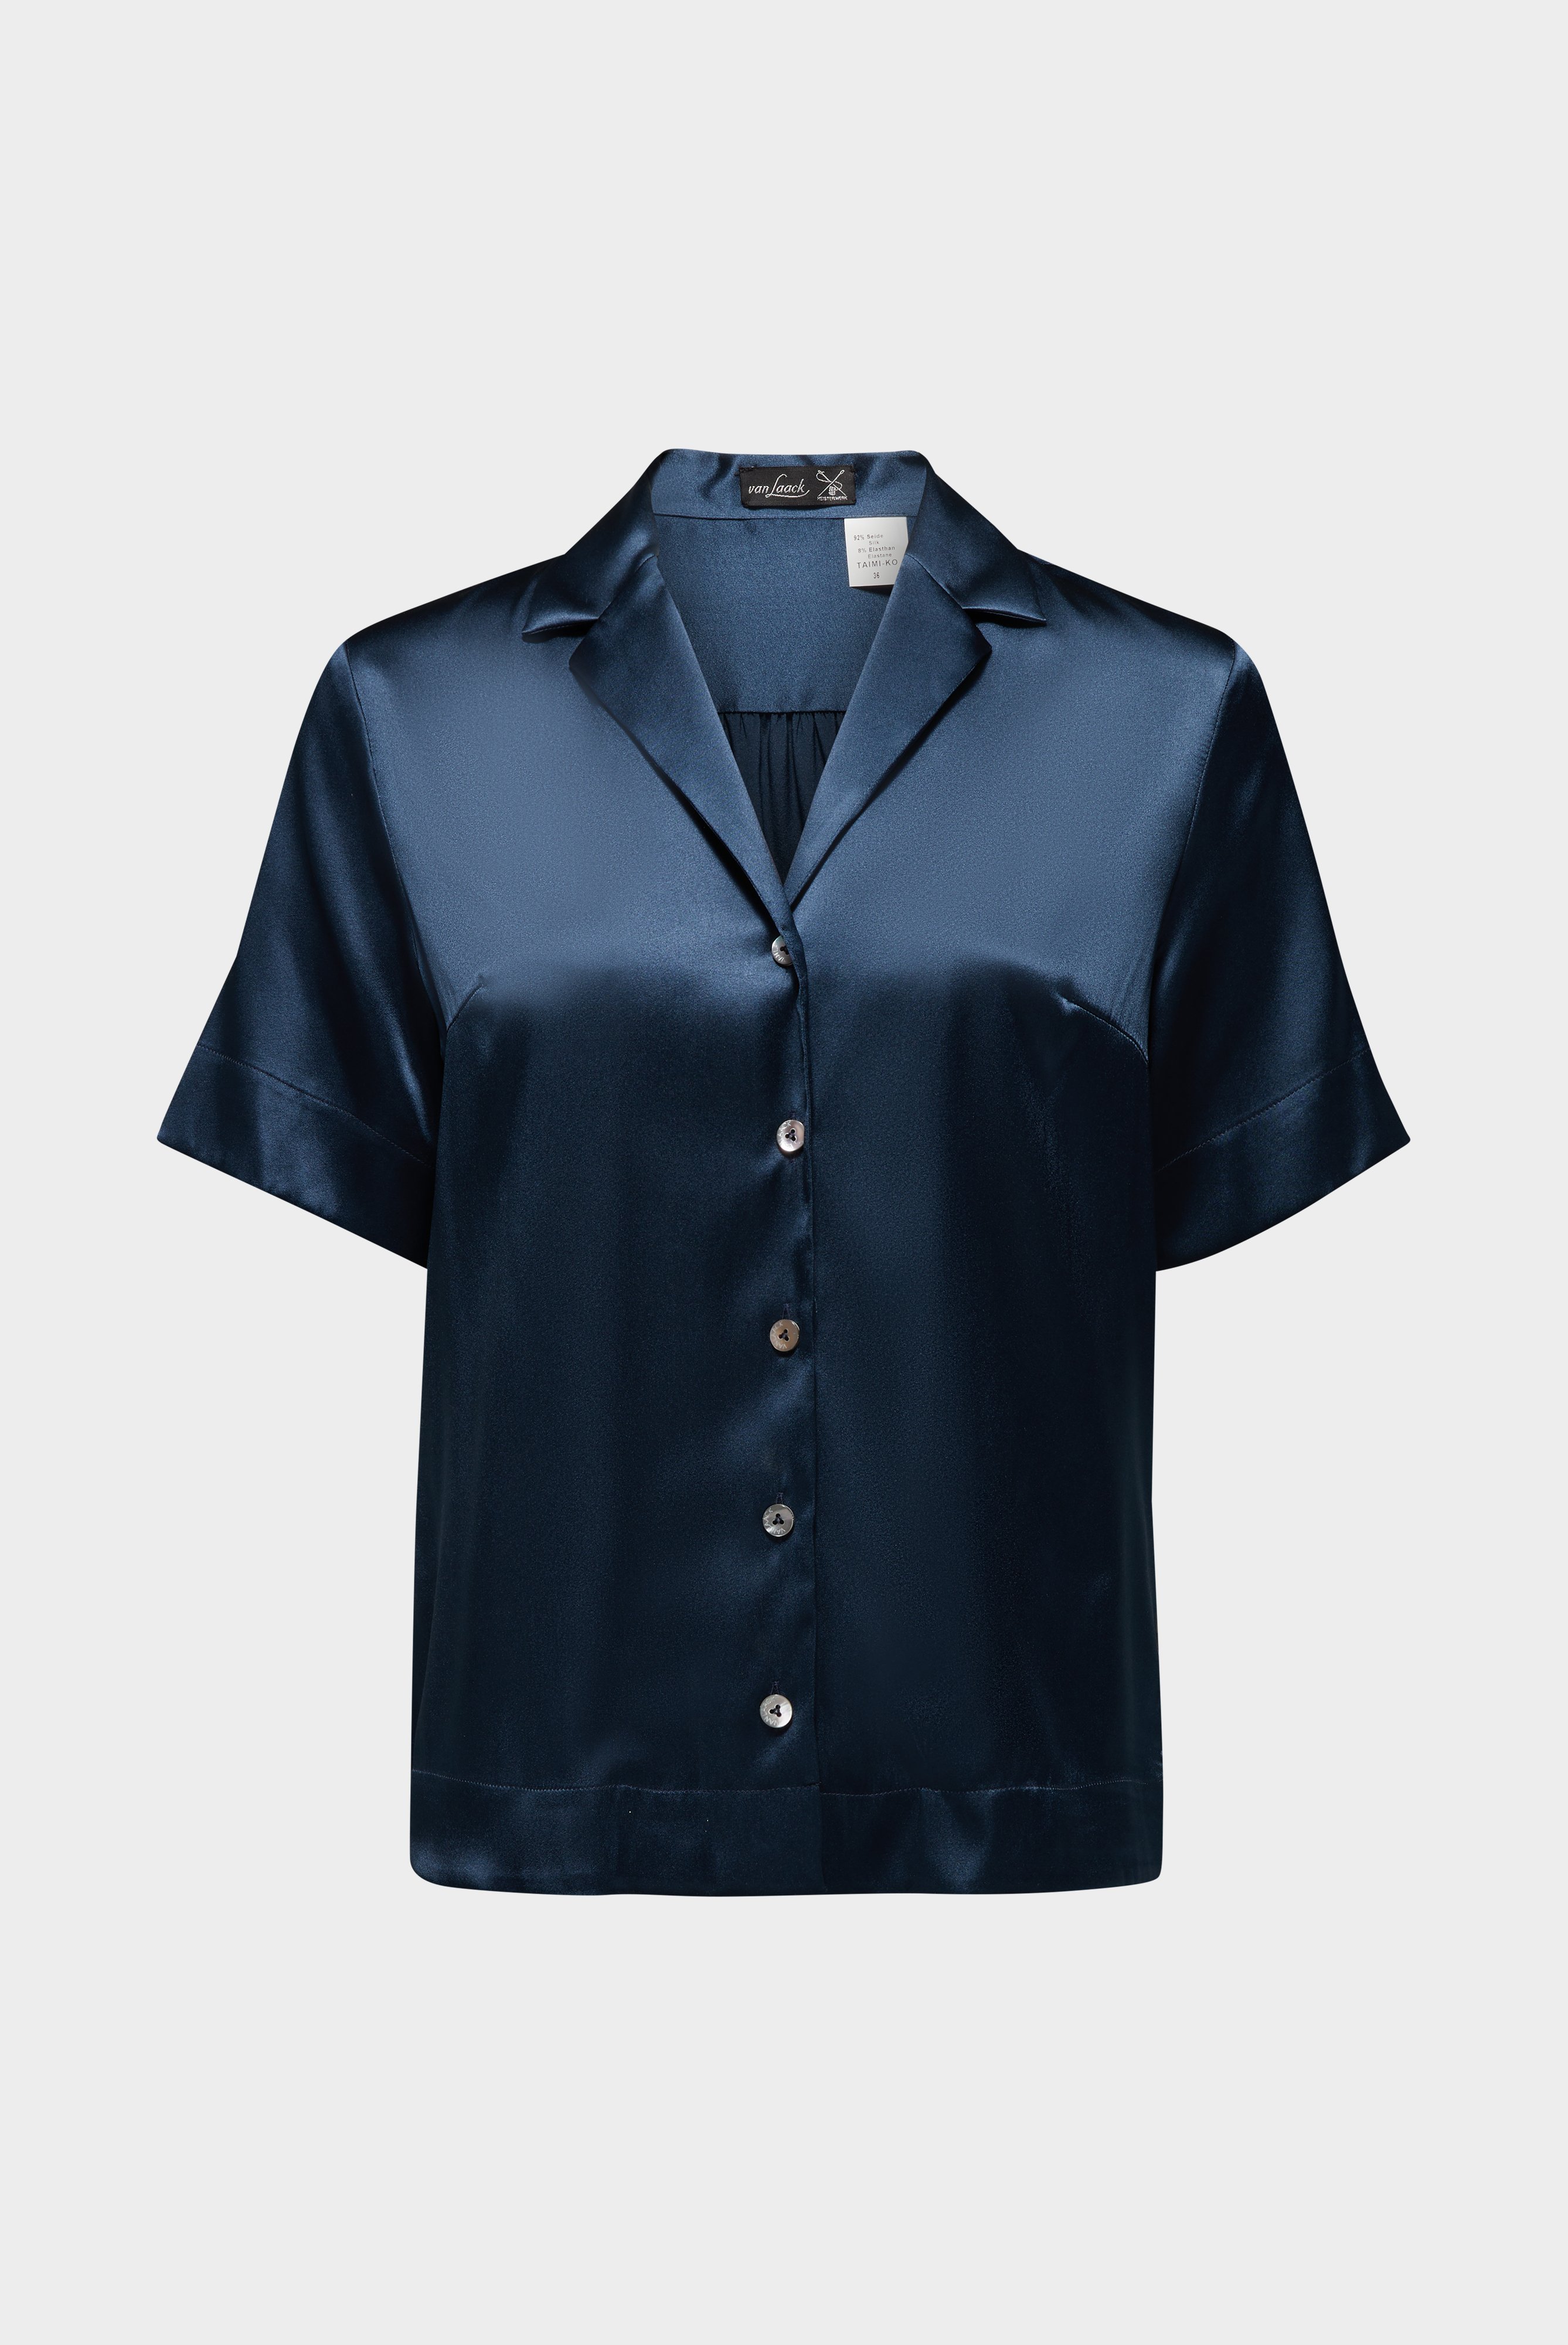 Casual Blouses+Blouse with Camp Collar+05.529C.56.155152.780.34